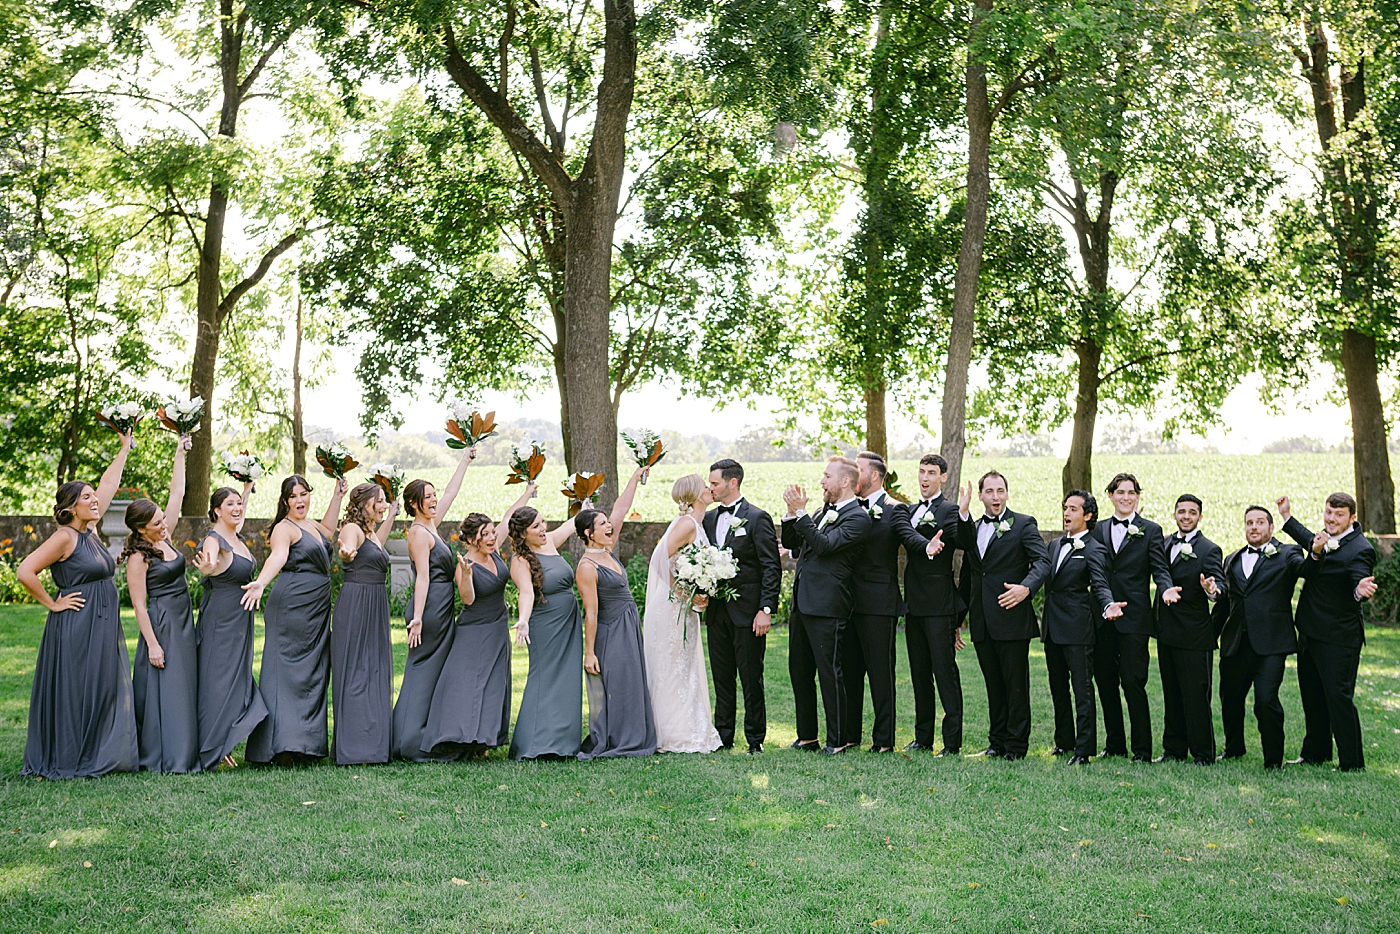 Bride and groom kissing while wedding party cheers | Image by Hope Helmuth Photography